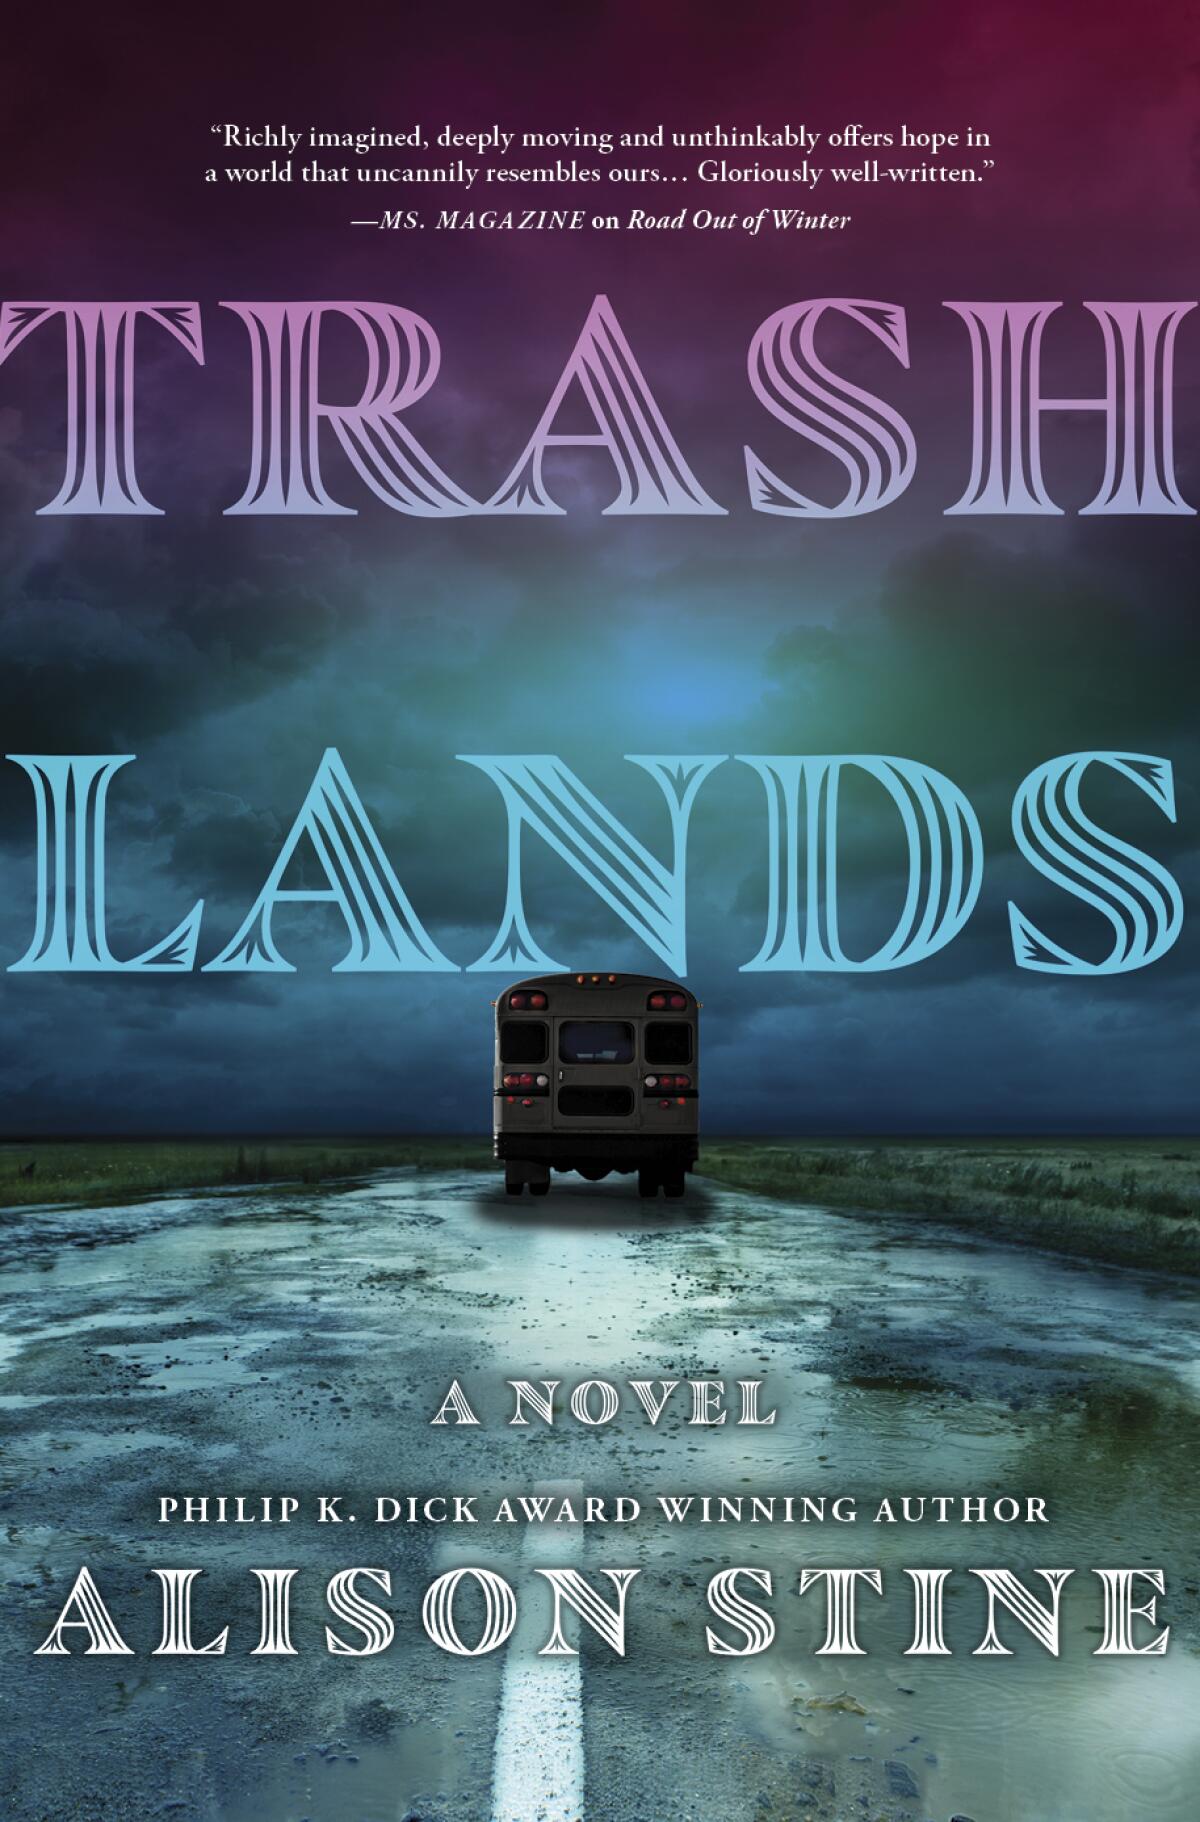 A school bus on a road in nighttime on the cover of "Trashlands."